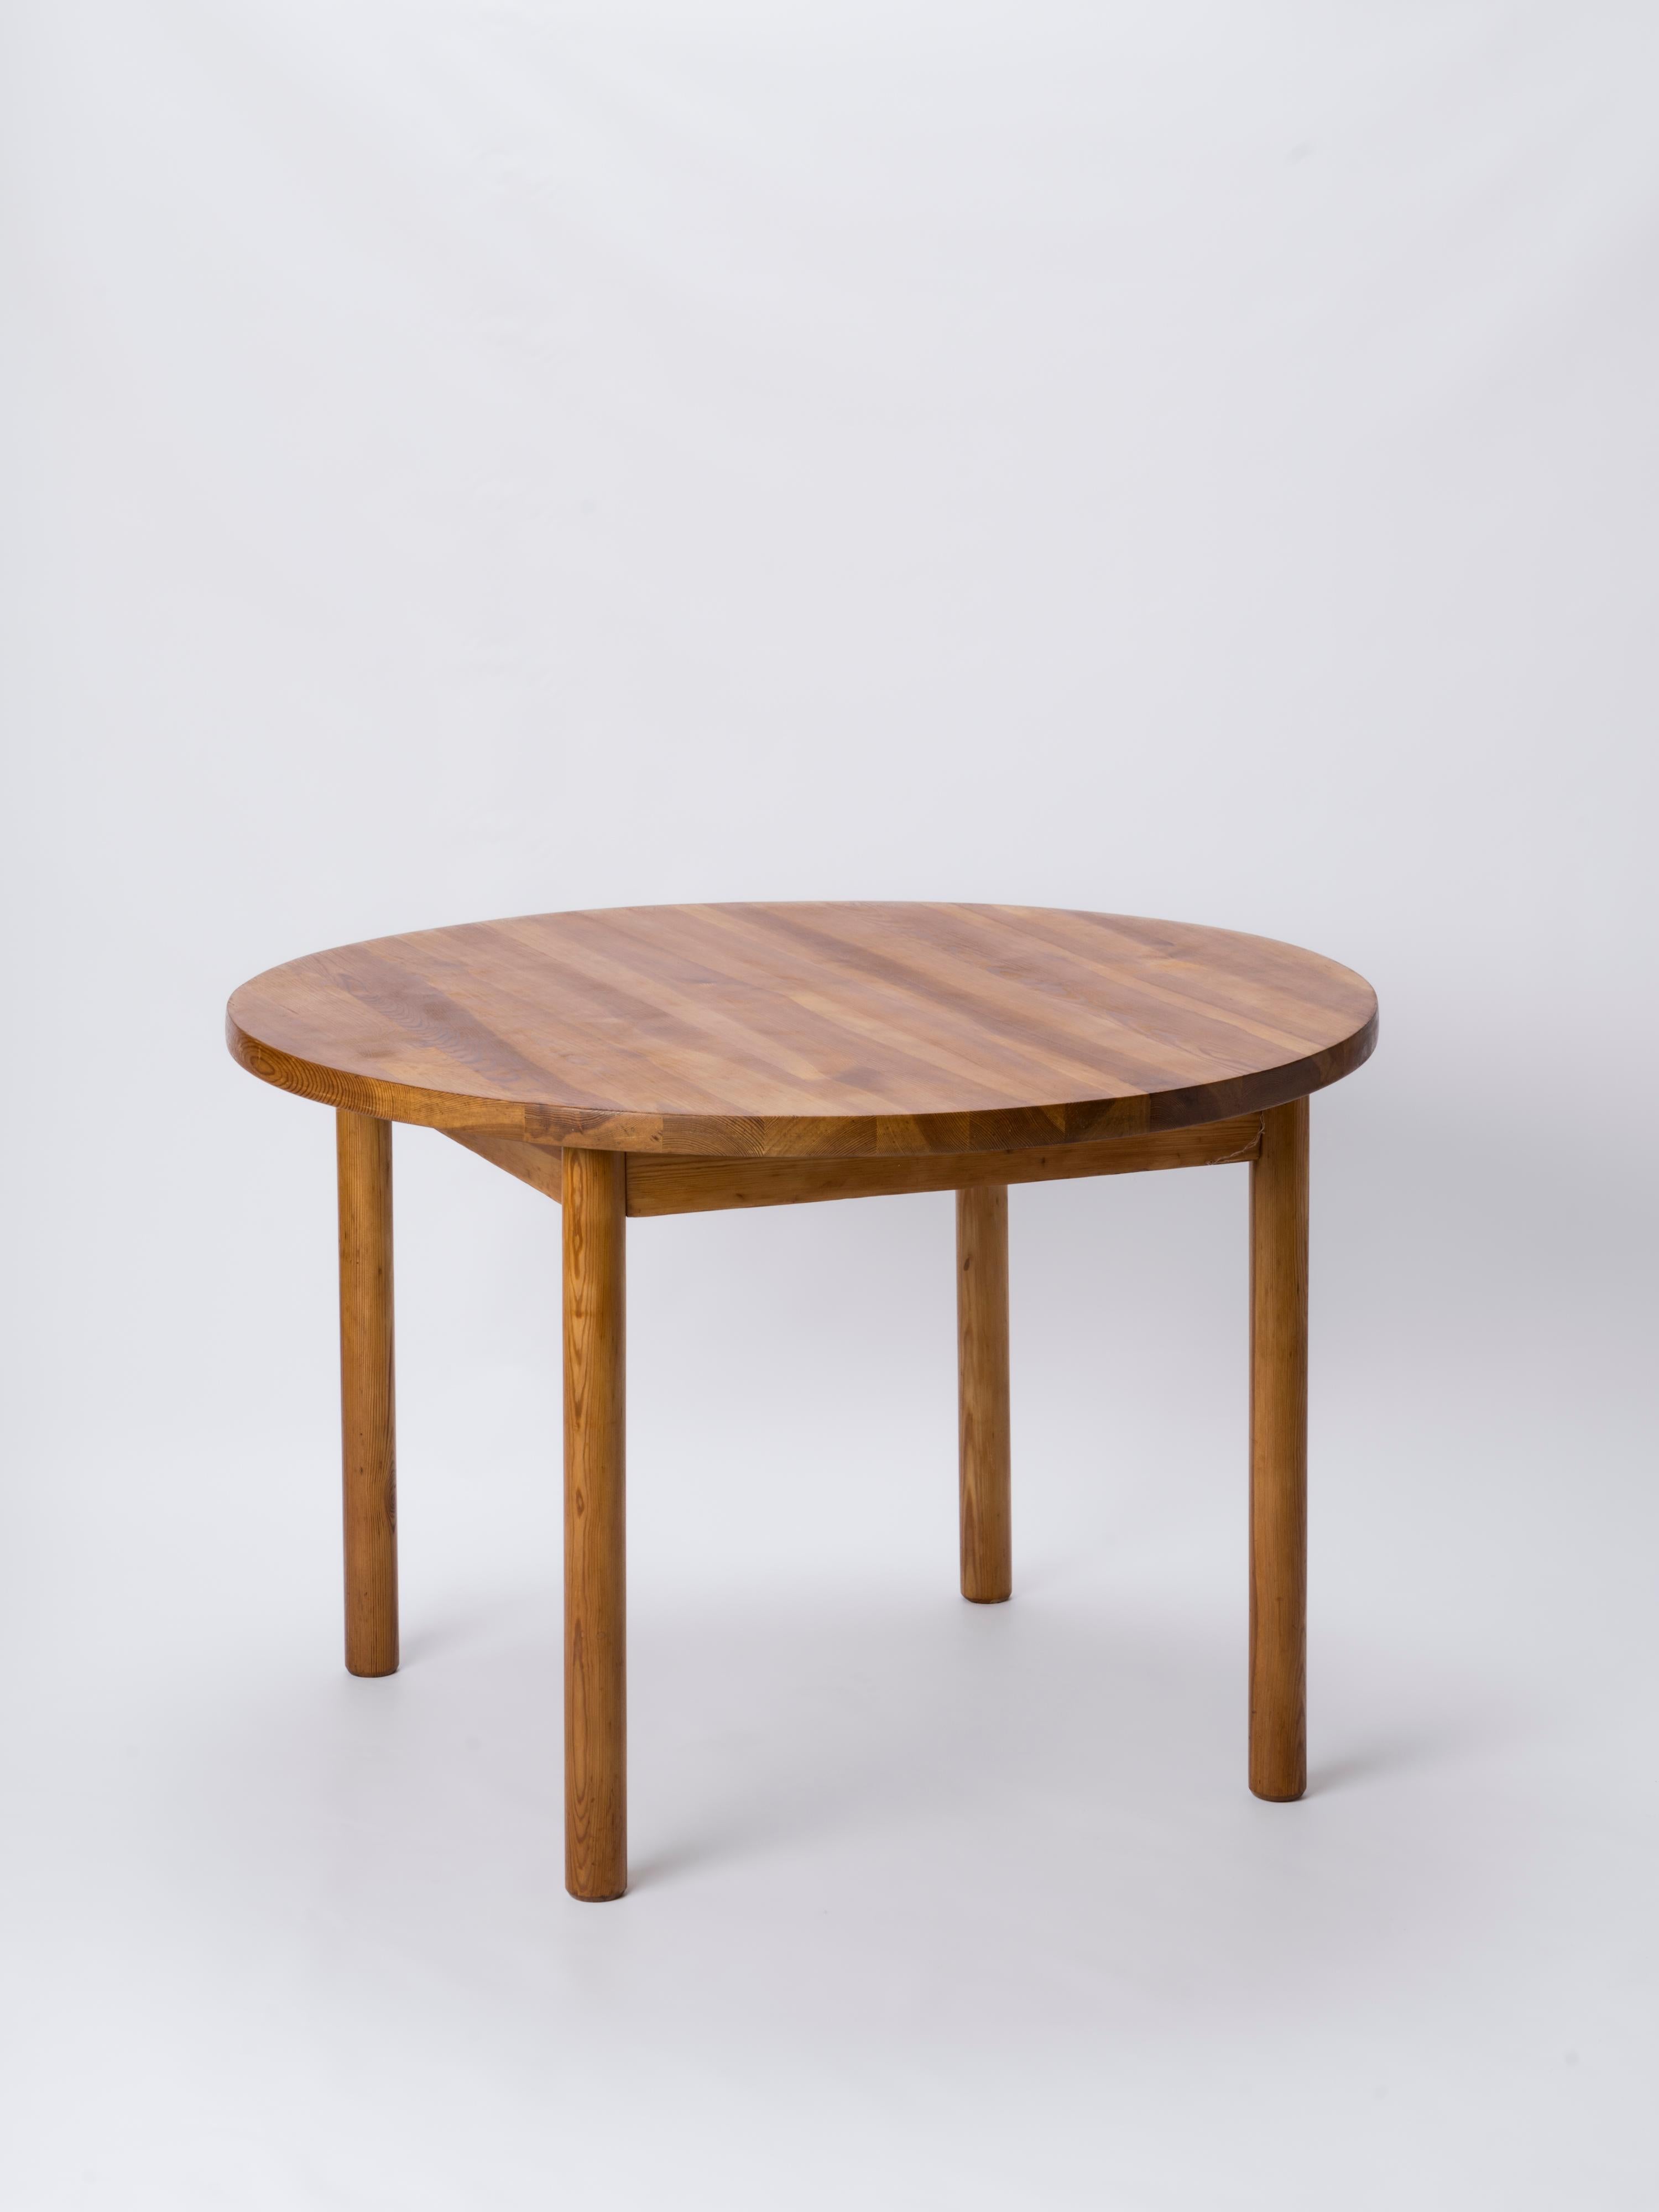 Minimalist all solid pine center table in the style of Charlotte Perriand and Pierre Gautier Delaye. Legs can be easily dissasembled and screwed back together again for easier shipping and transportation.
This table will ship from France and can be